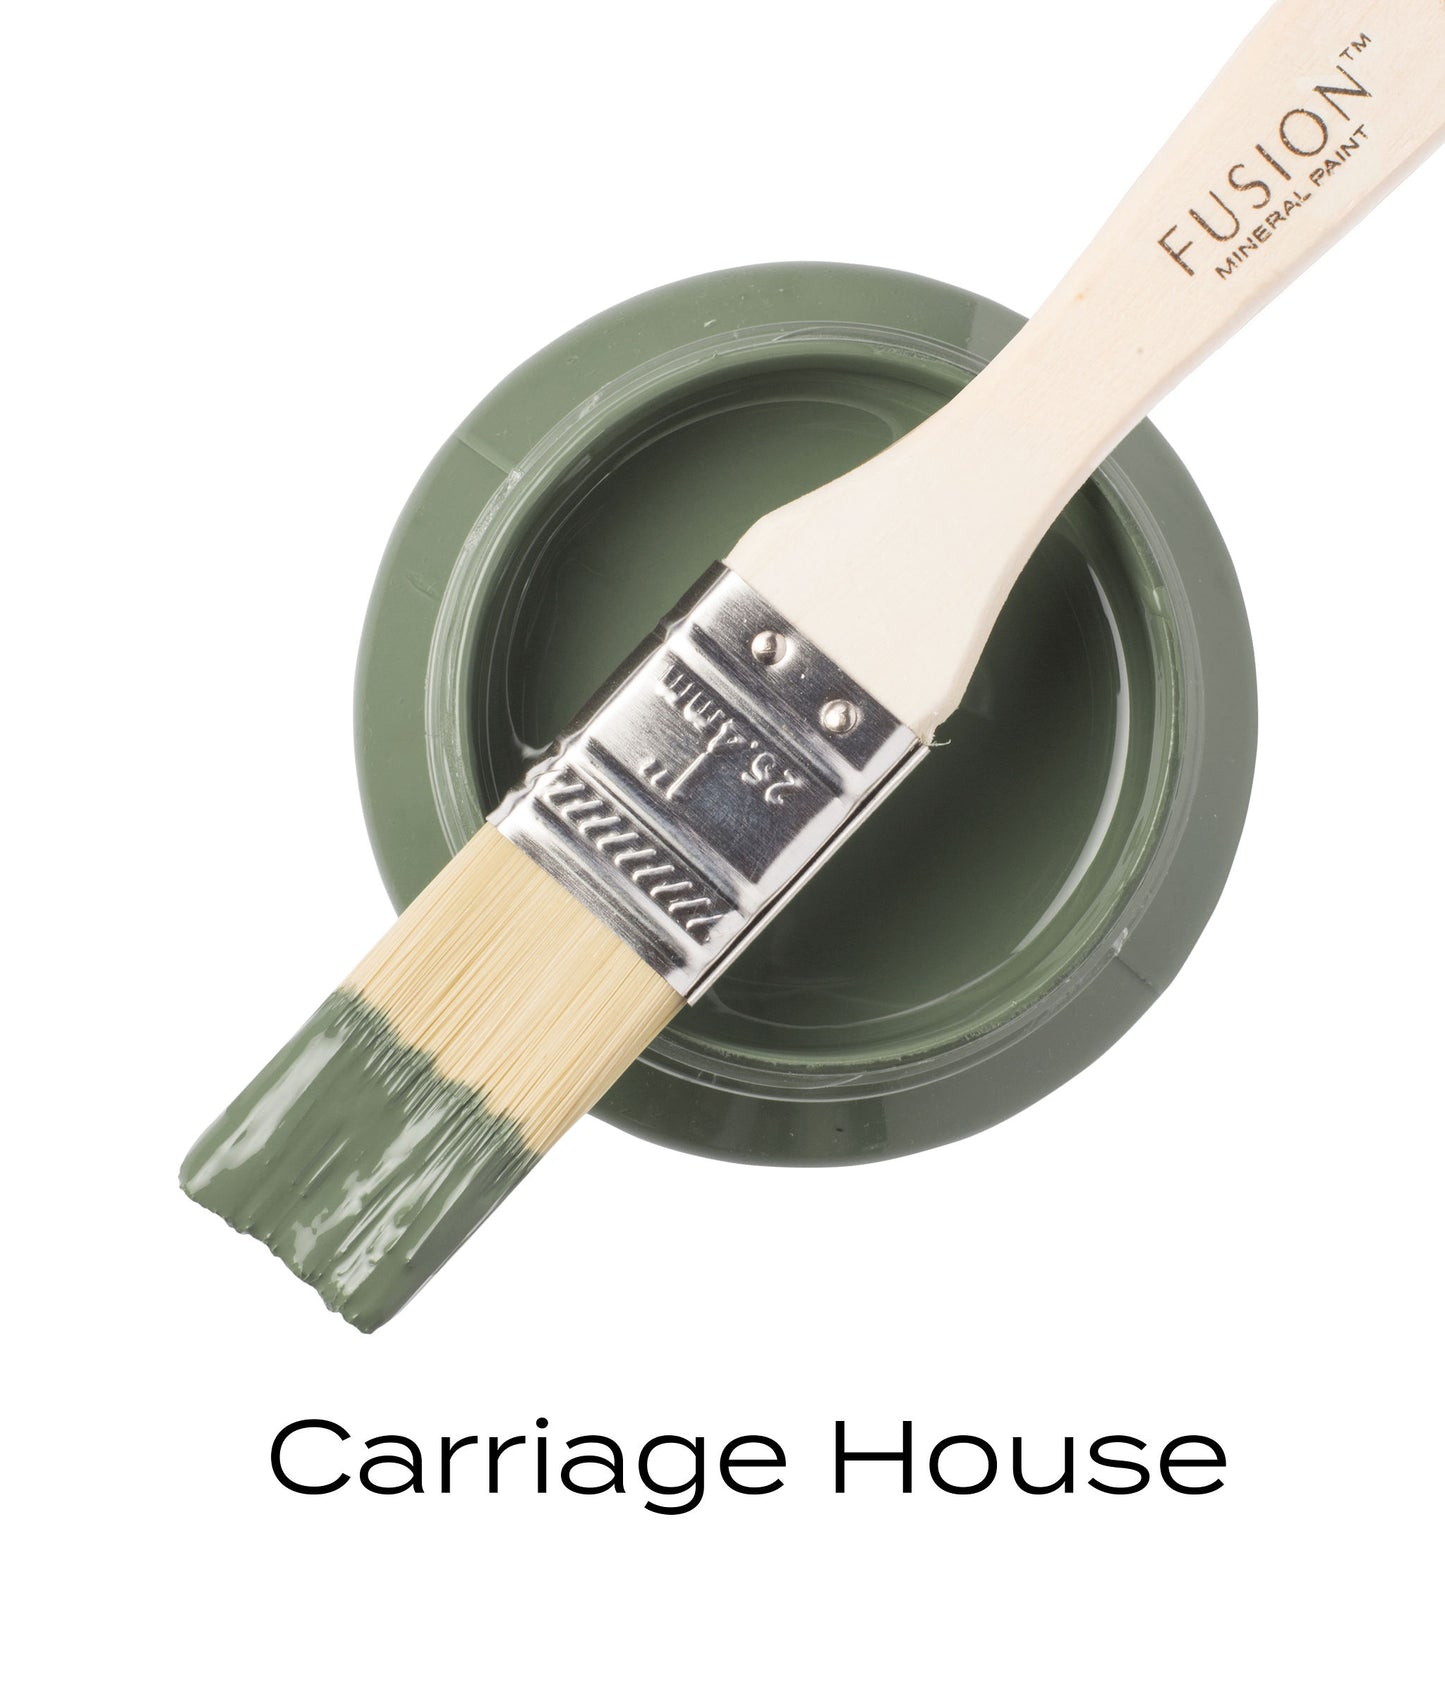 Carriage House -Fusion Mineral Paint